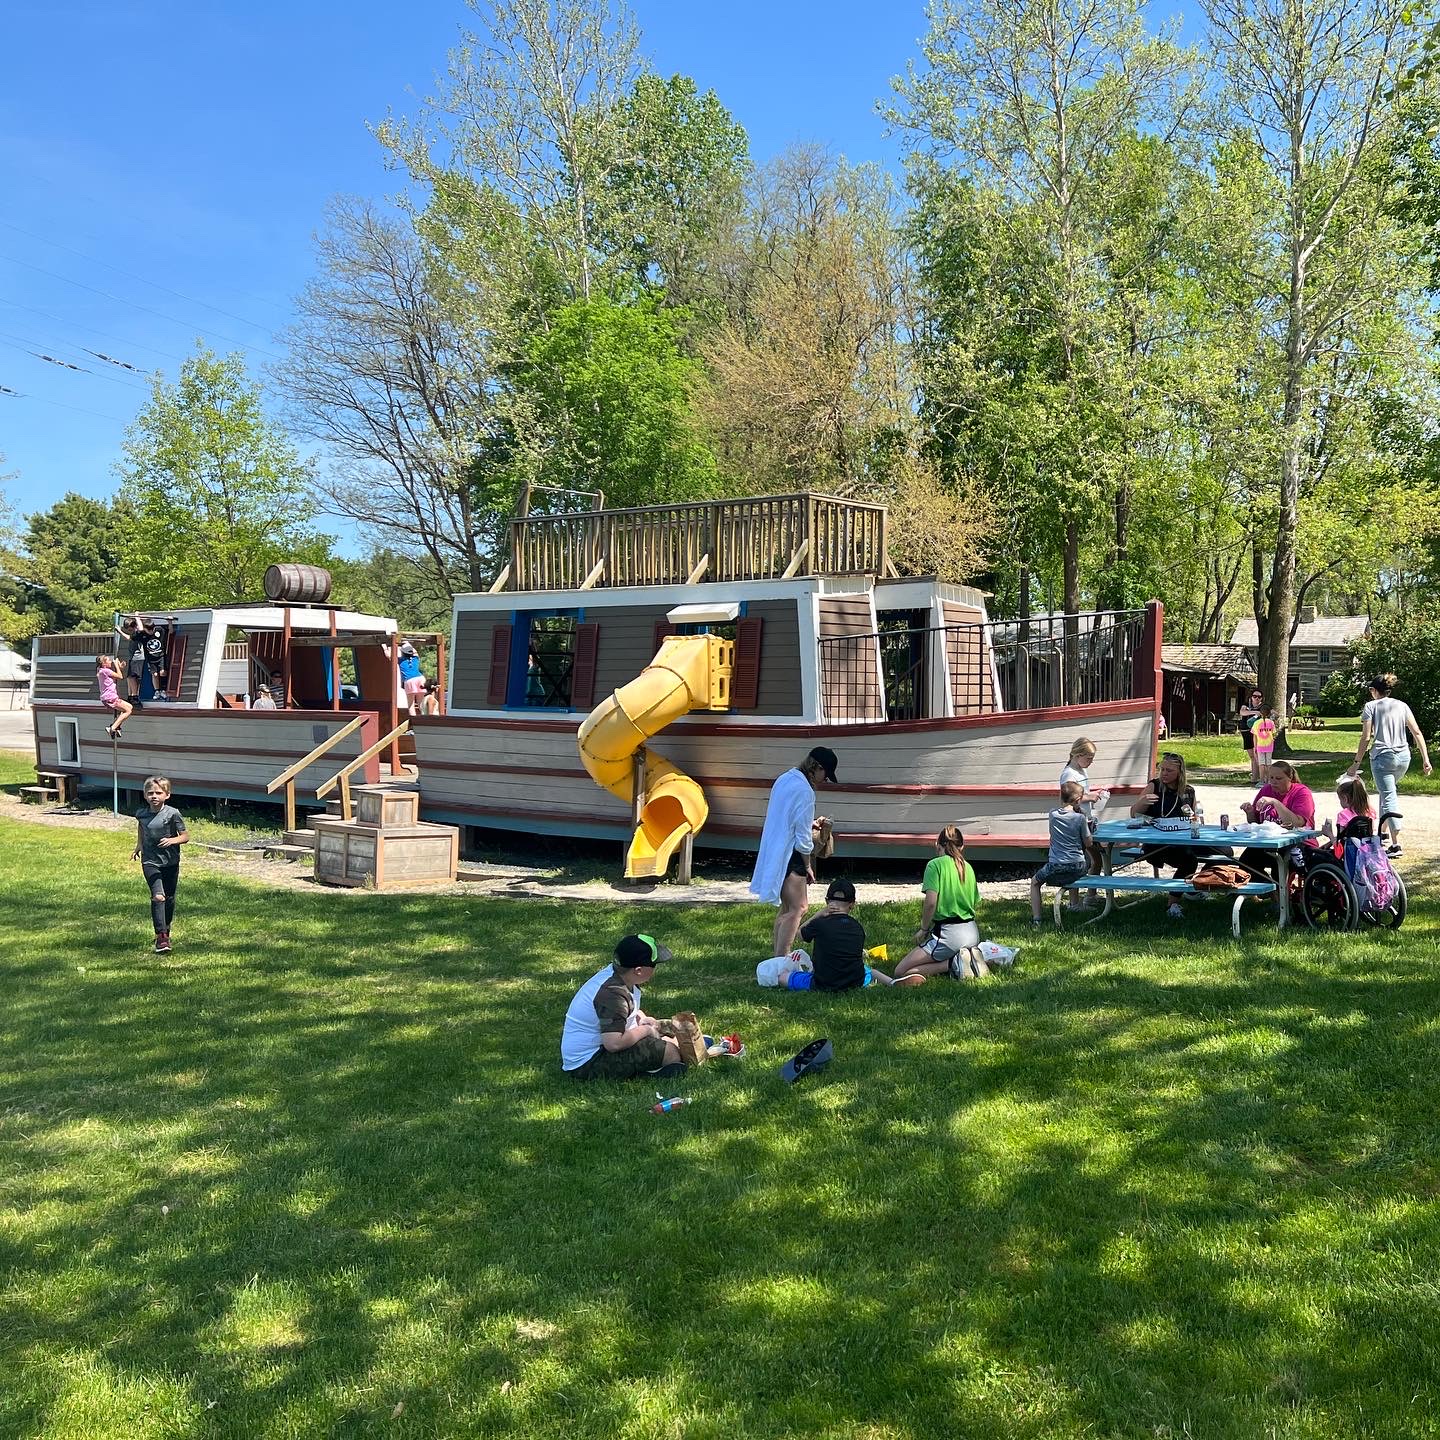 A group plays on the replica canal boat playground and enjoys a picnic